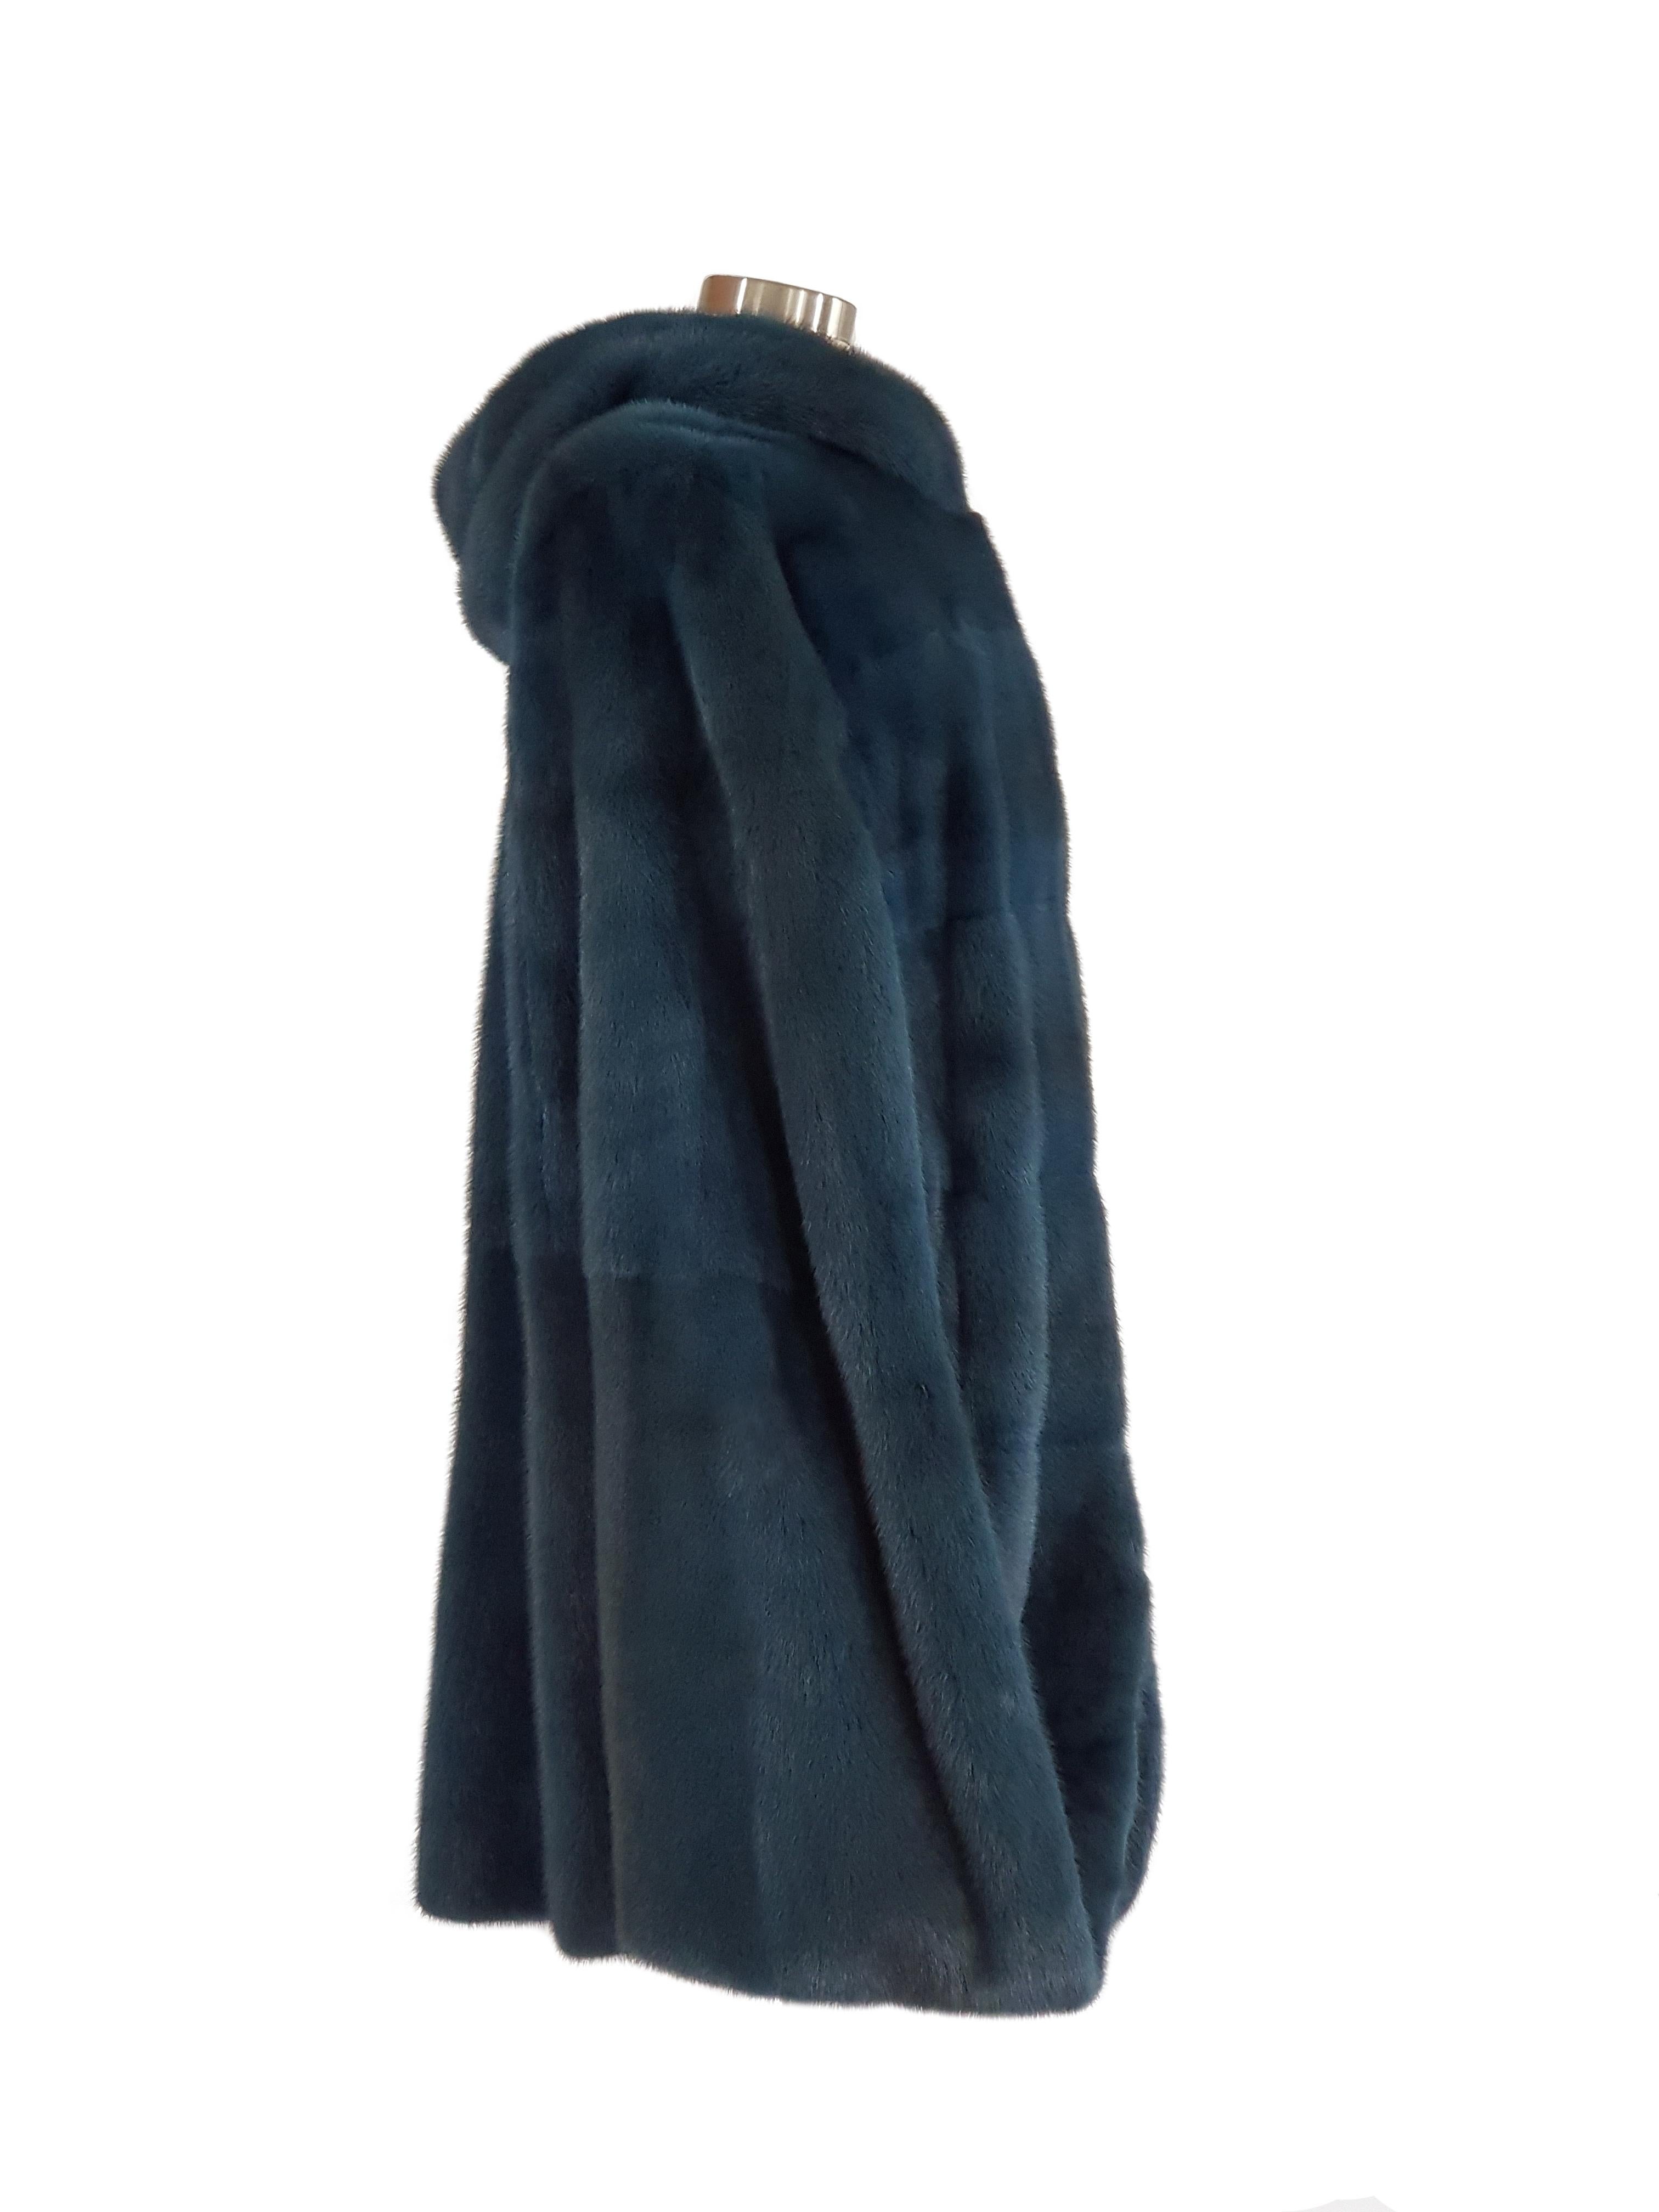 Reversible colored mink poncho with snap closure and hooded. Helen Yarmak exclusive detachable 100% silk lining.